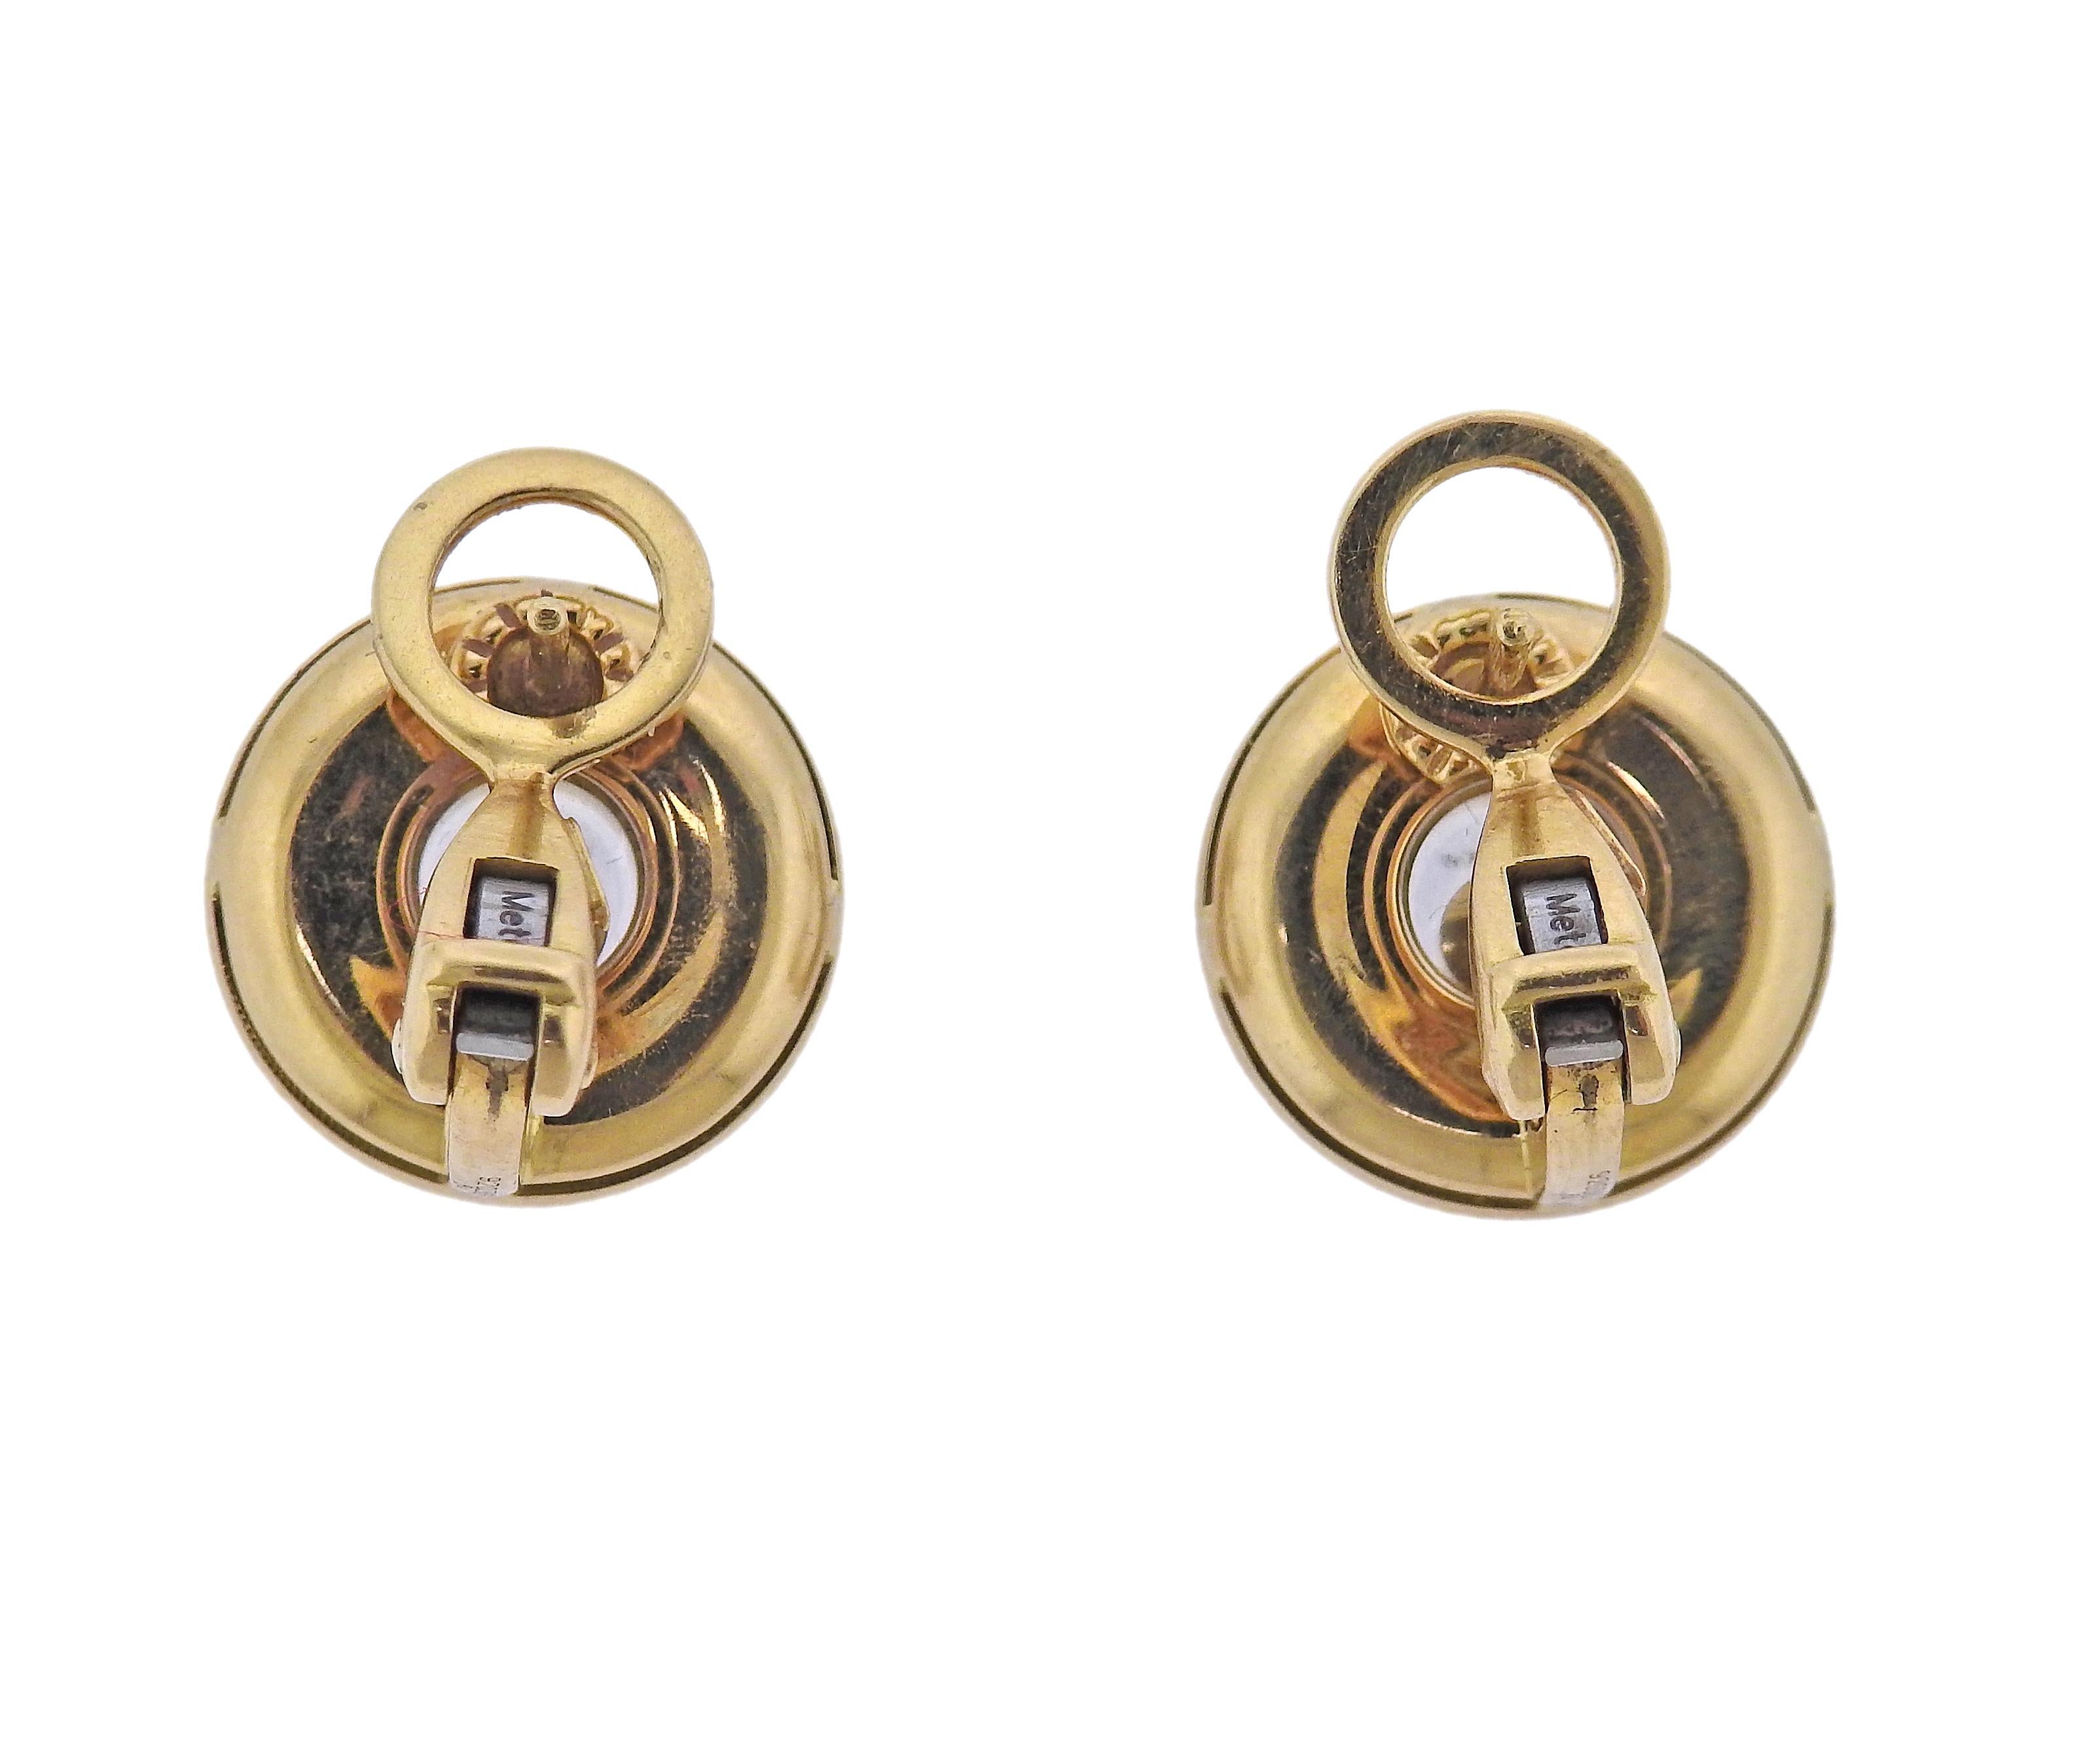 Pair of classic 18k gold earrings by Chopard, from Happy Diamonds collection, set with signature floating diamonds in the center. Earrings are 16mm in diameter. Diamonds total approx. 0.70ctw FG/VVS. Marked: LUC, 750, 9203864, Chopard, 84/1868-20.